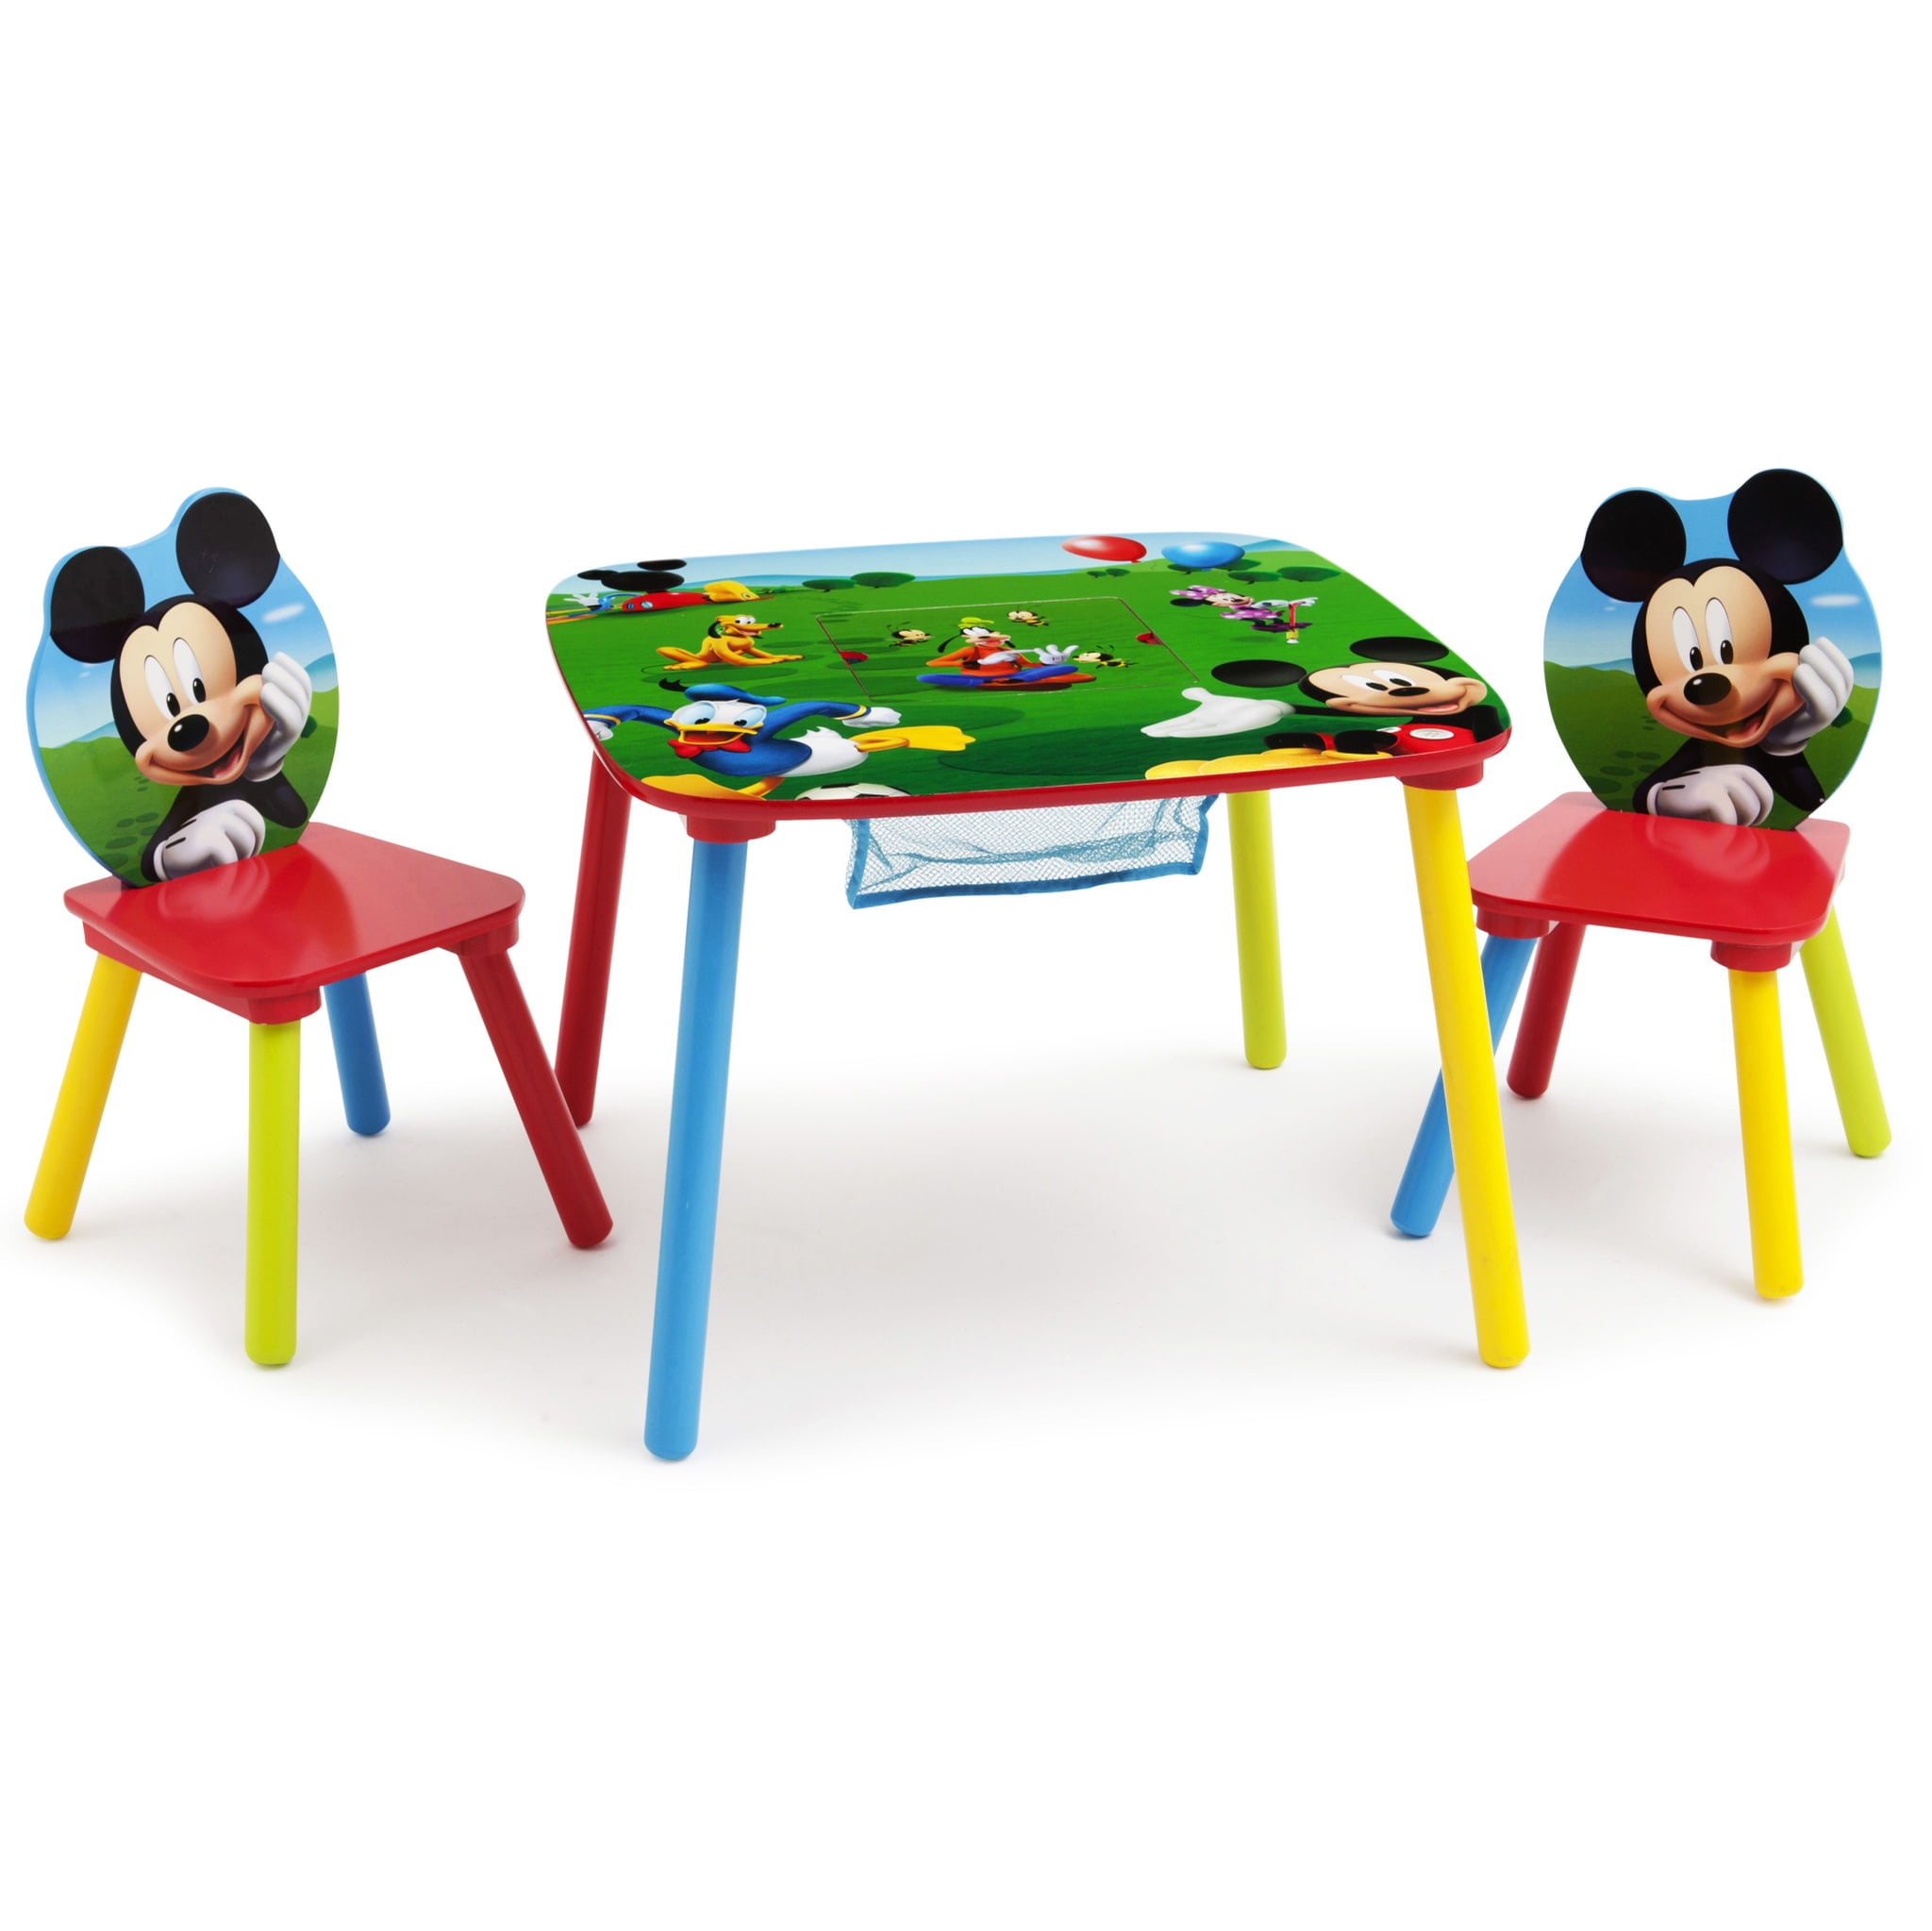 Disney Mickey Mouse Wood Kids Storage Table and Chairs Set by Delta Children